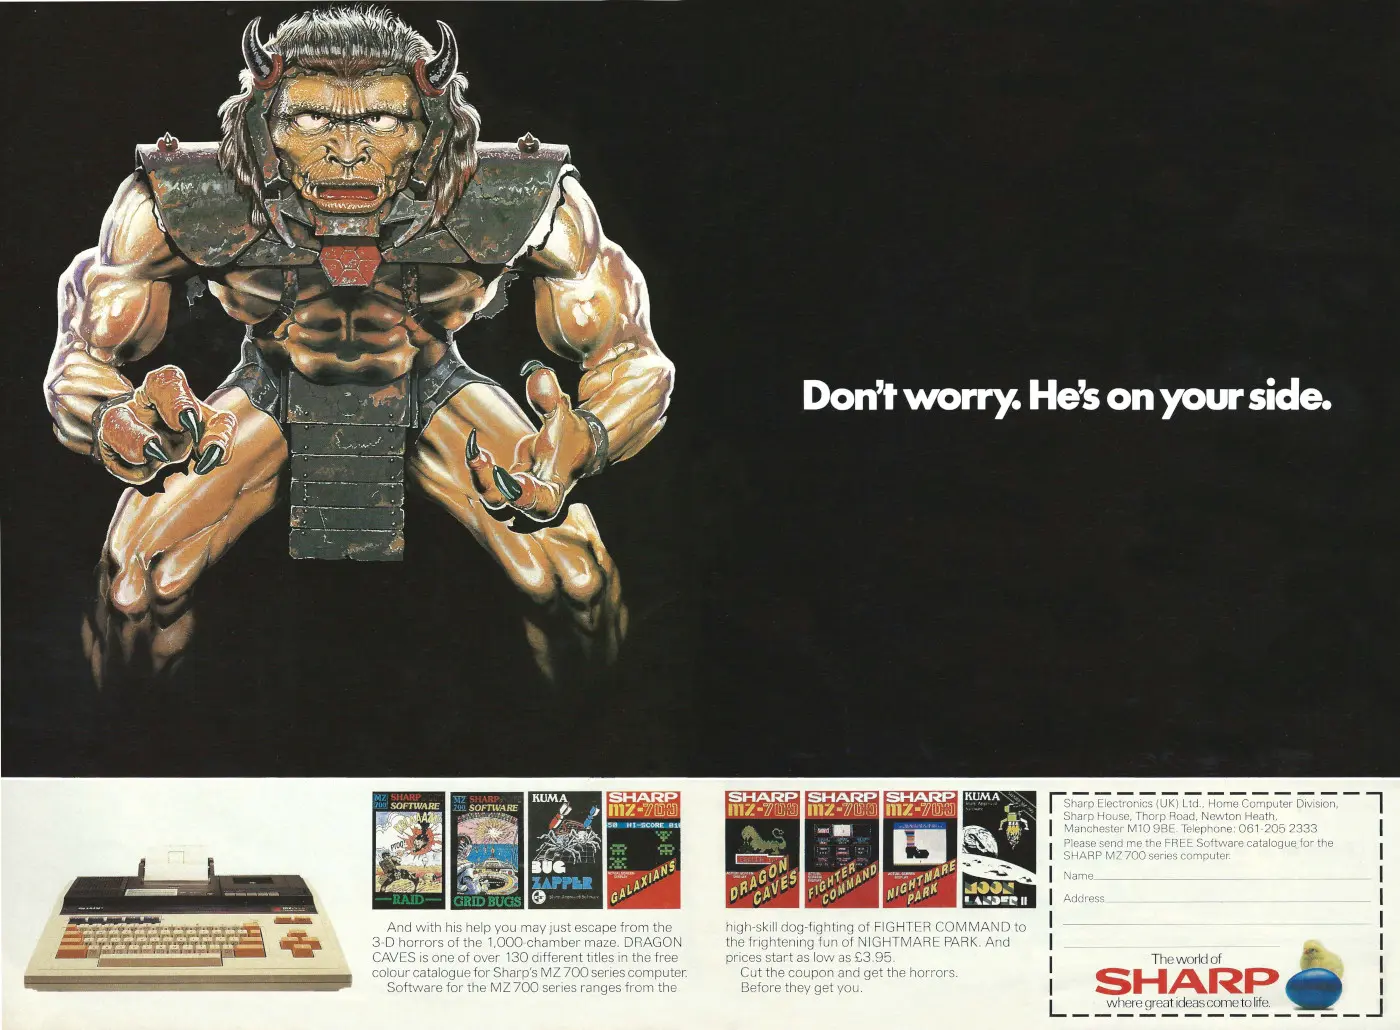 Sharp Advert: Don't worry. He's on your side, from Your Computer, September 1984